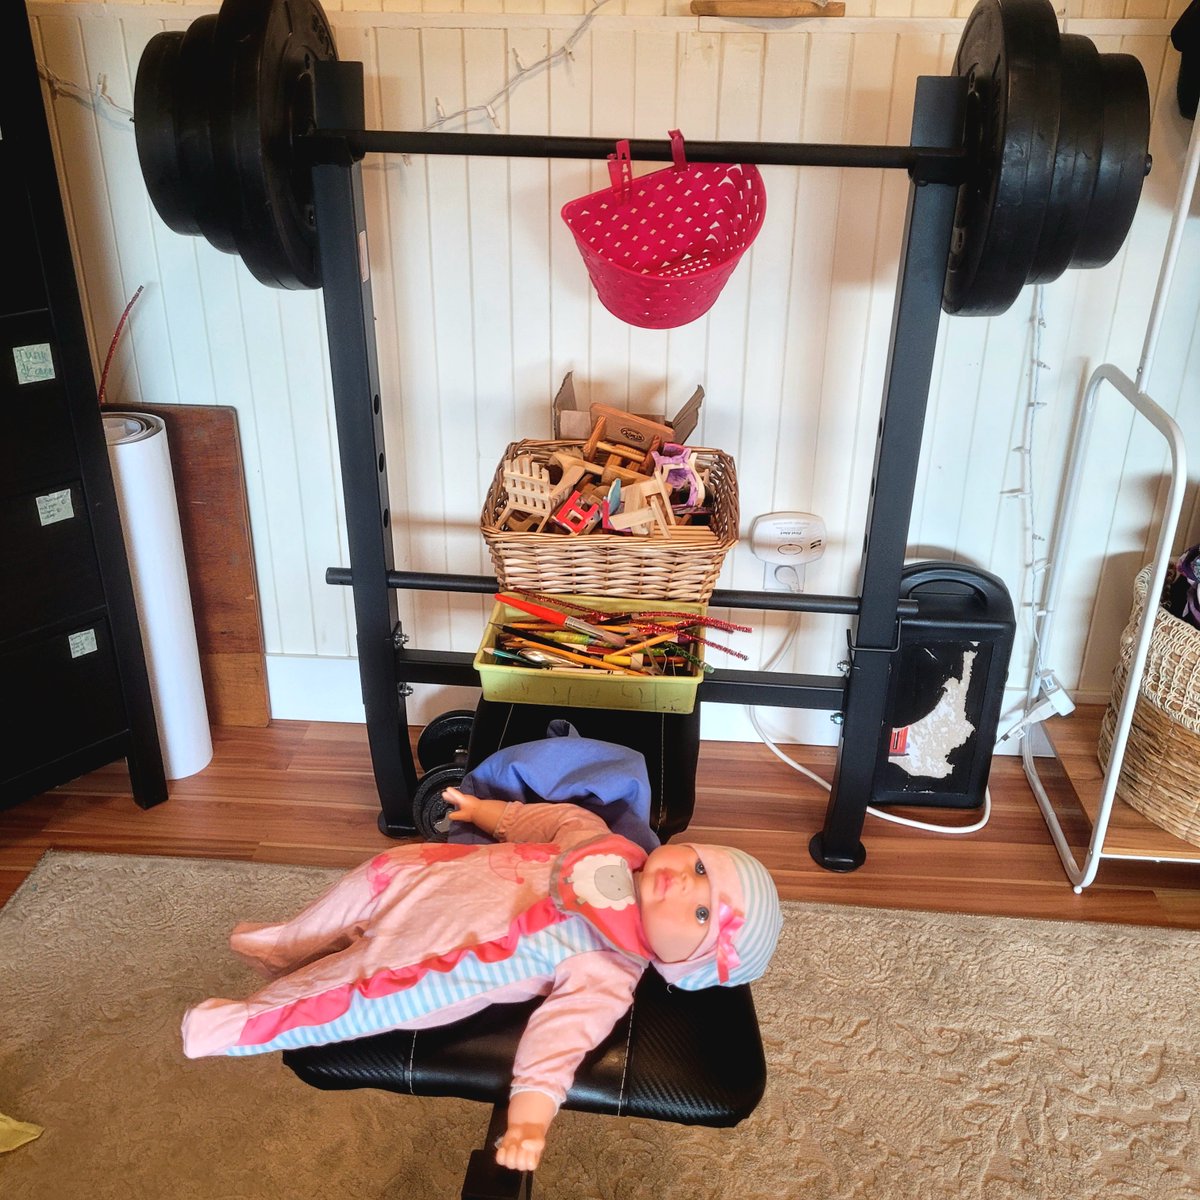 People say that your home workout equipment wont get used. Here is clear evidence that this perspective is wrong - my 2020 covid weight bench is still in high demand 4 years later.